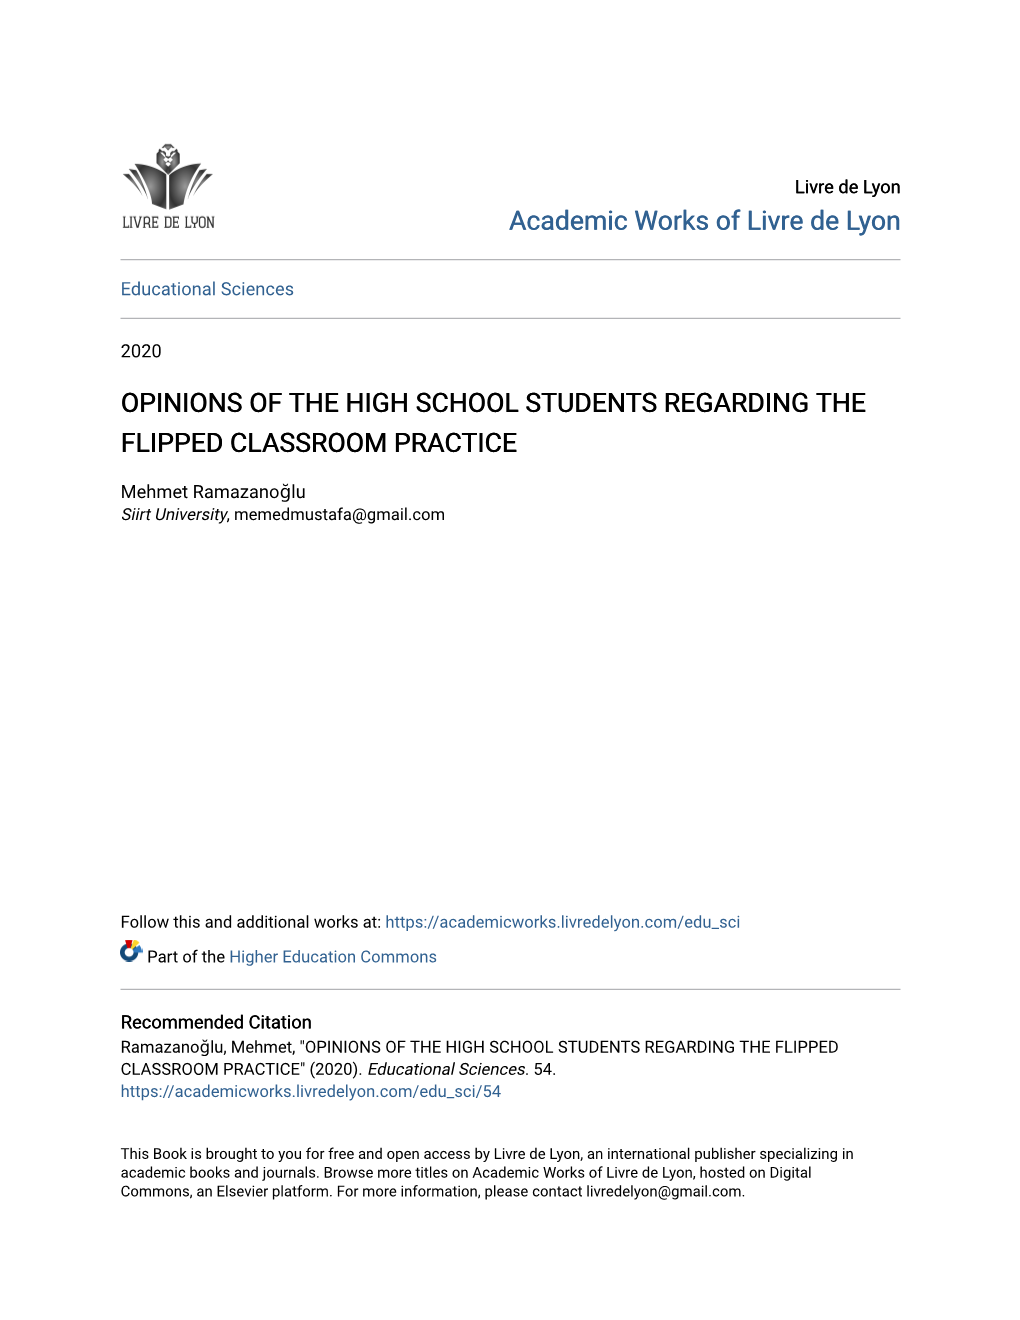 Opinions of the High School Students Regarding the Flipped Classroom Practice